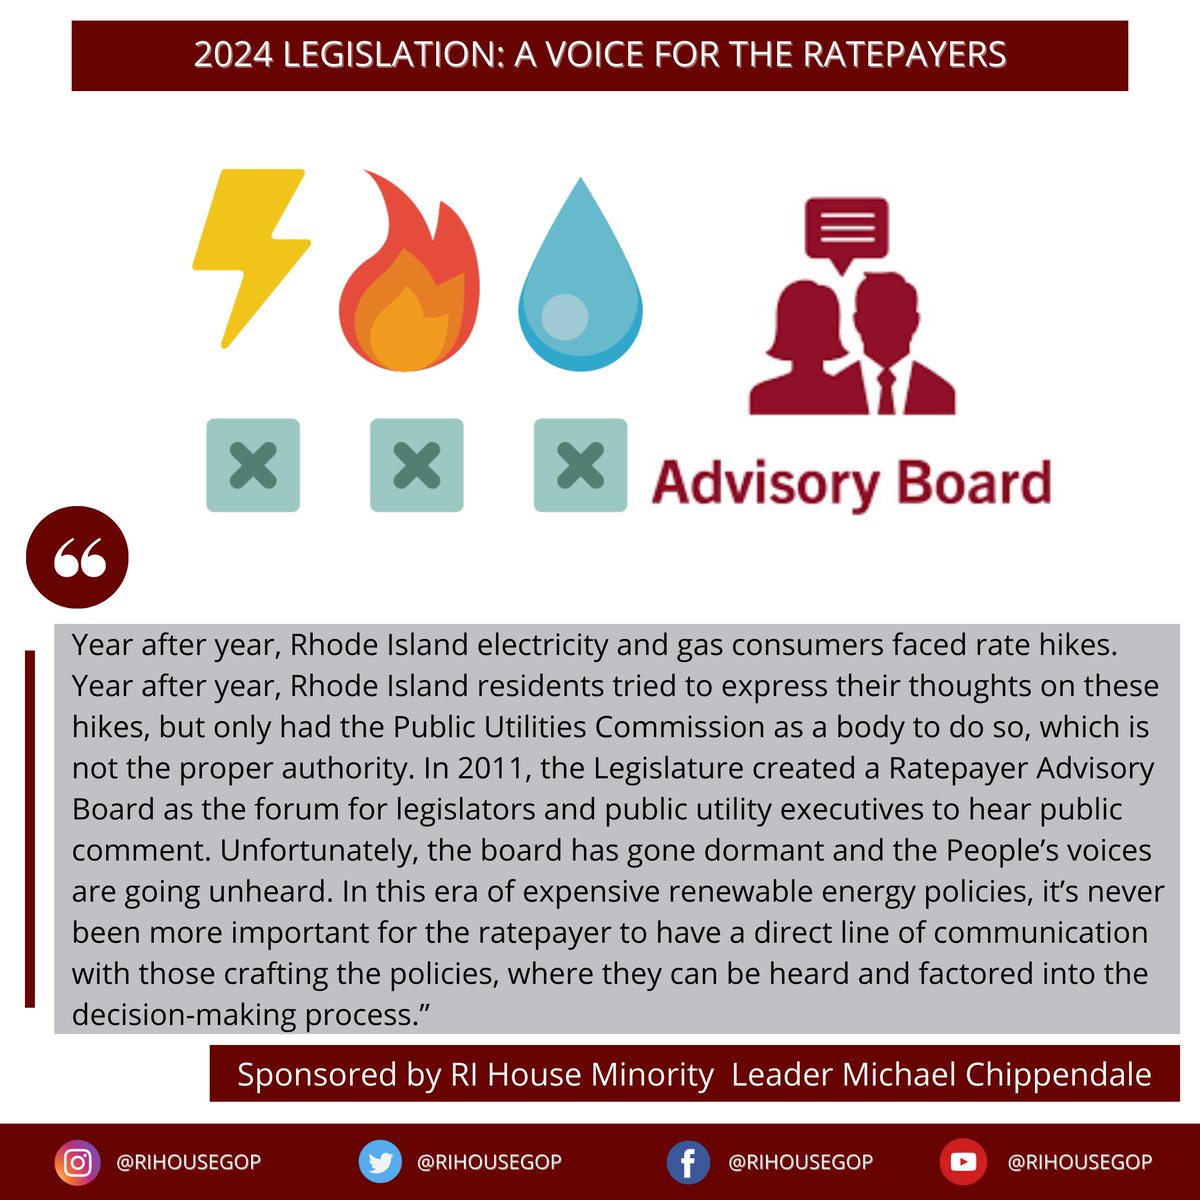 TODAY! Leader Michael Chippendale's @MikeWChip bill to Reactivate the PUC Ratepayer Advisory Board ( H7429) will be heard in House Corporations. Please weigh in on this important forum for input. Call your Representatives and ask to have this bill passed.